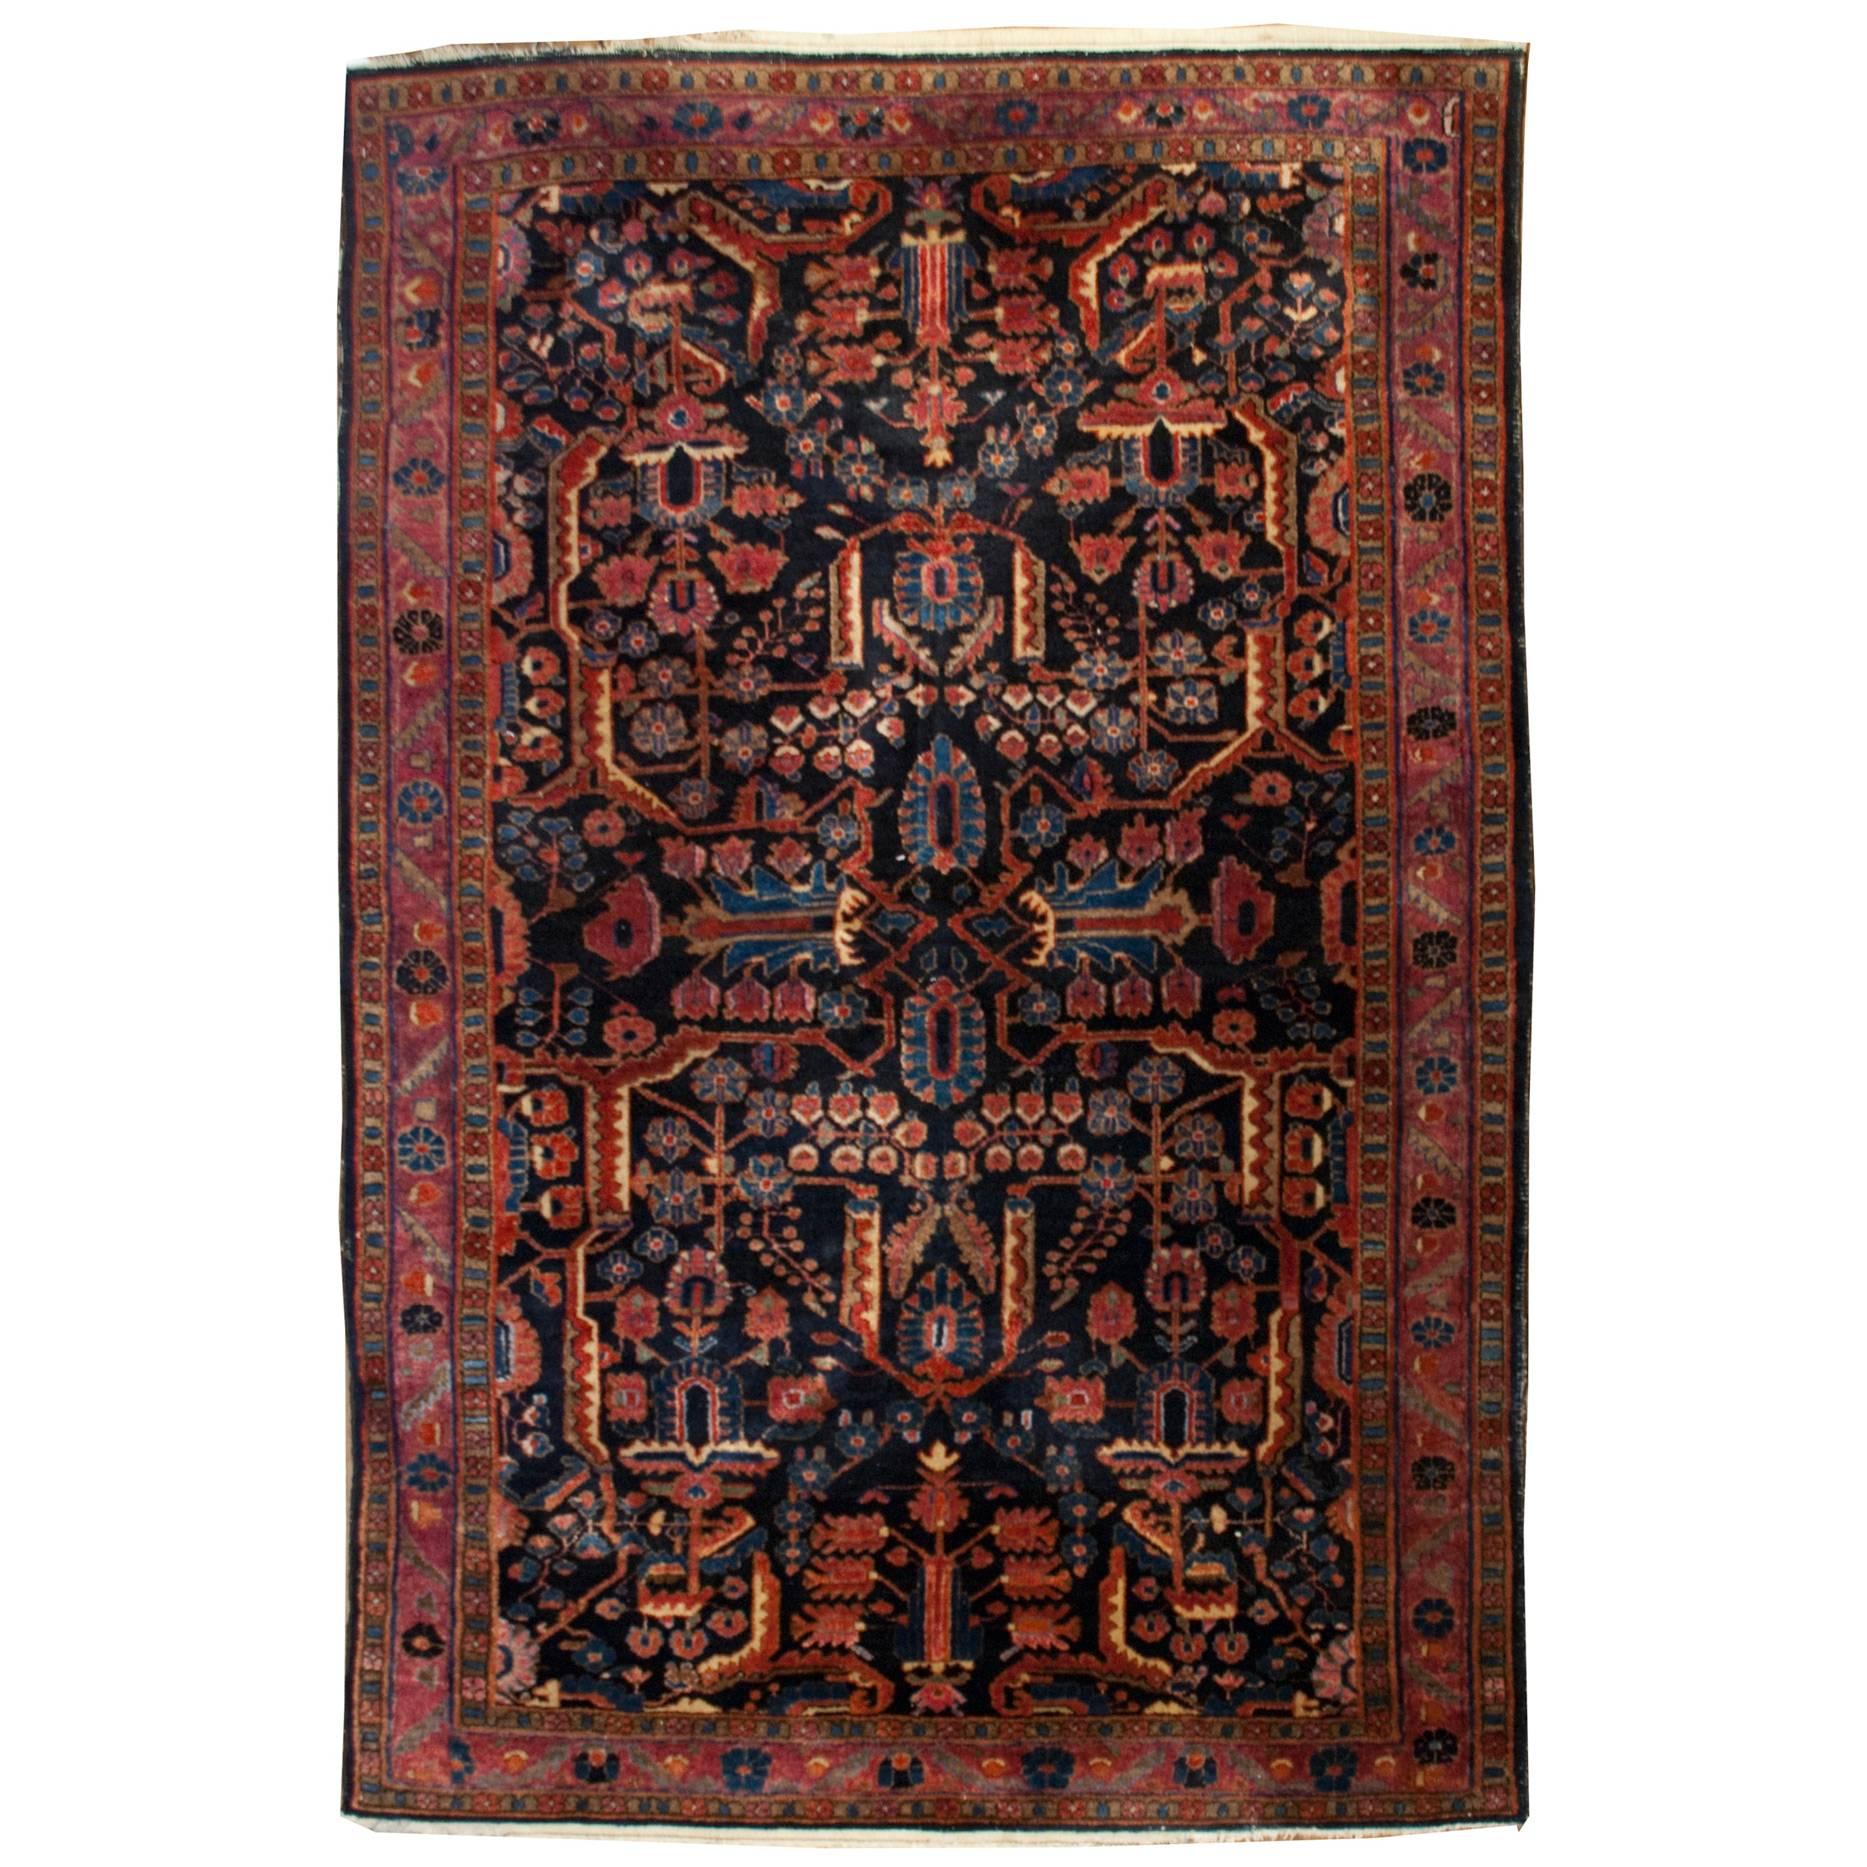 Early 20th Century, Malayer, Rug